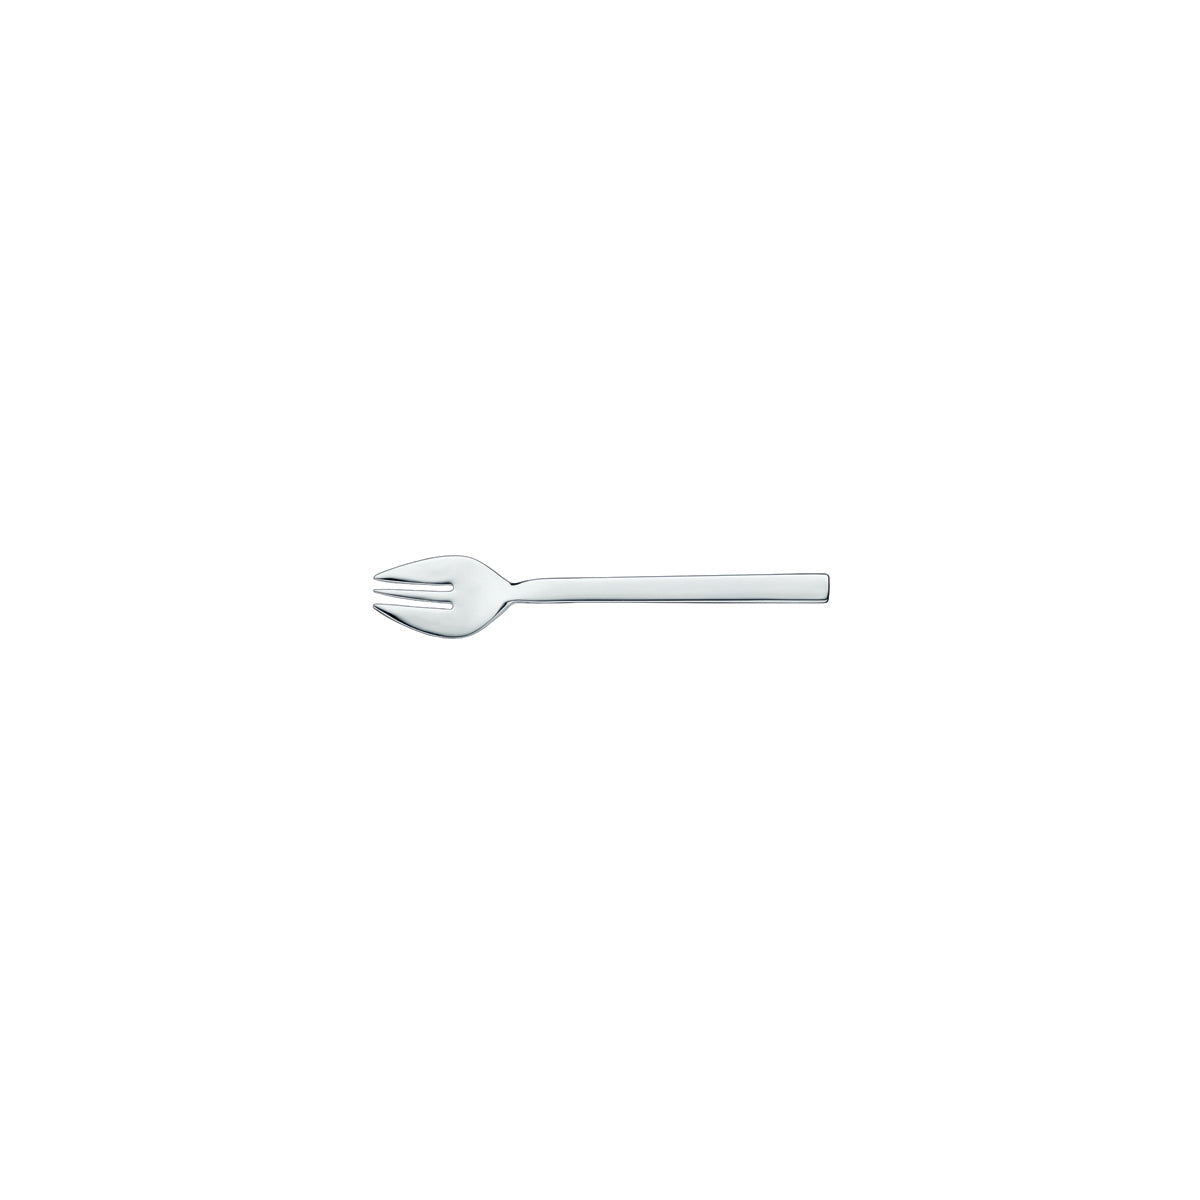 10.5340.6060 WMF Unic Oyster Fork Silverplated Tomkin Australia Hospitality Supplies